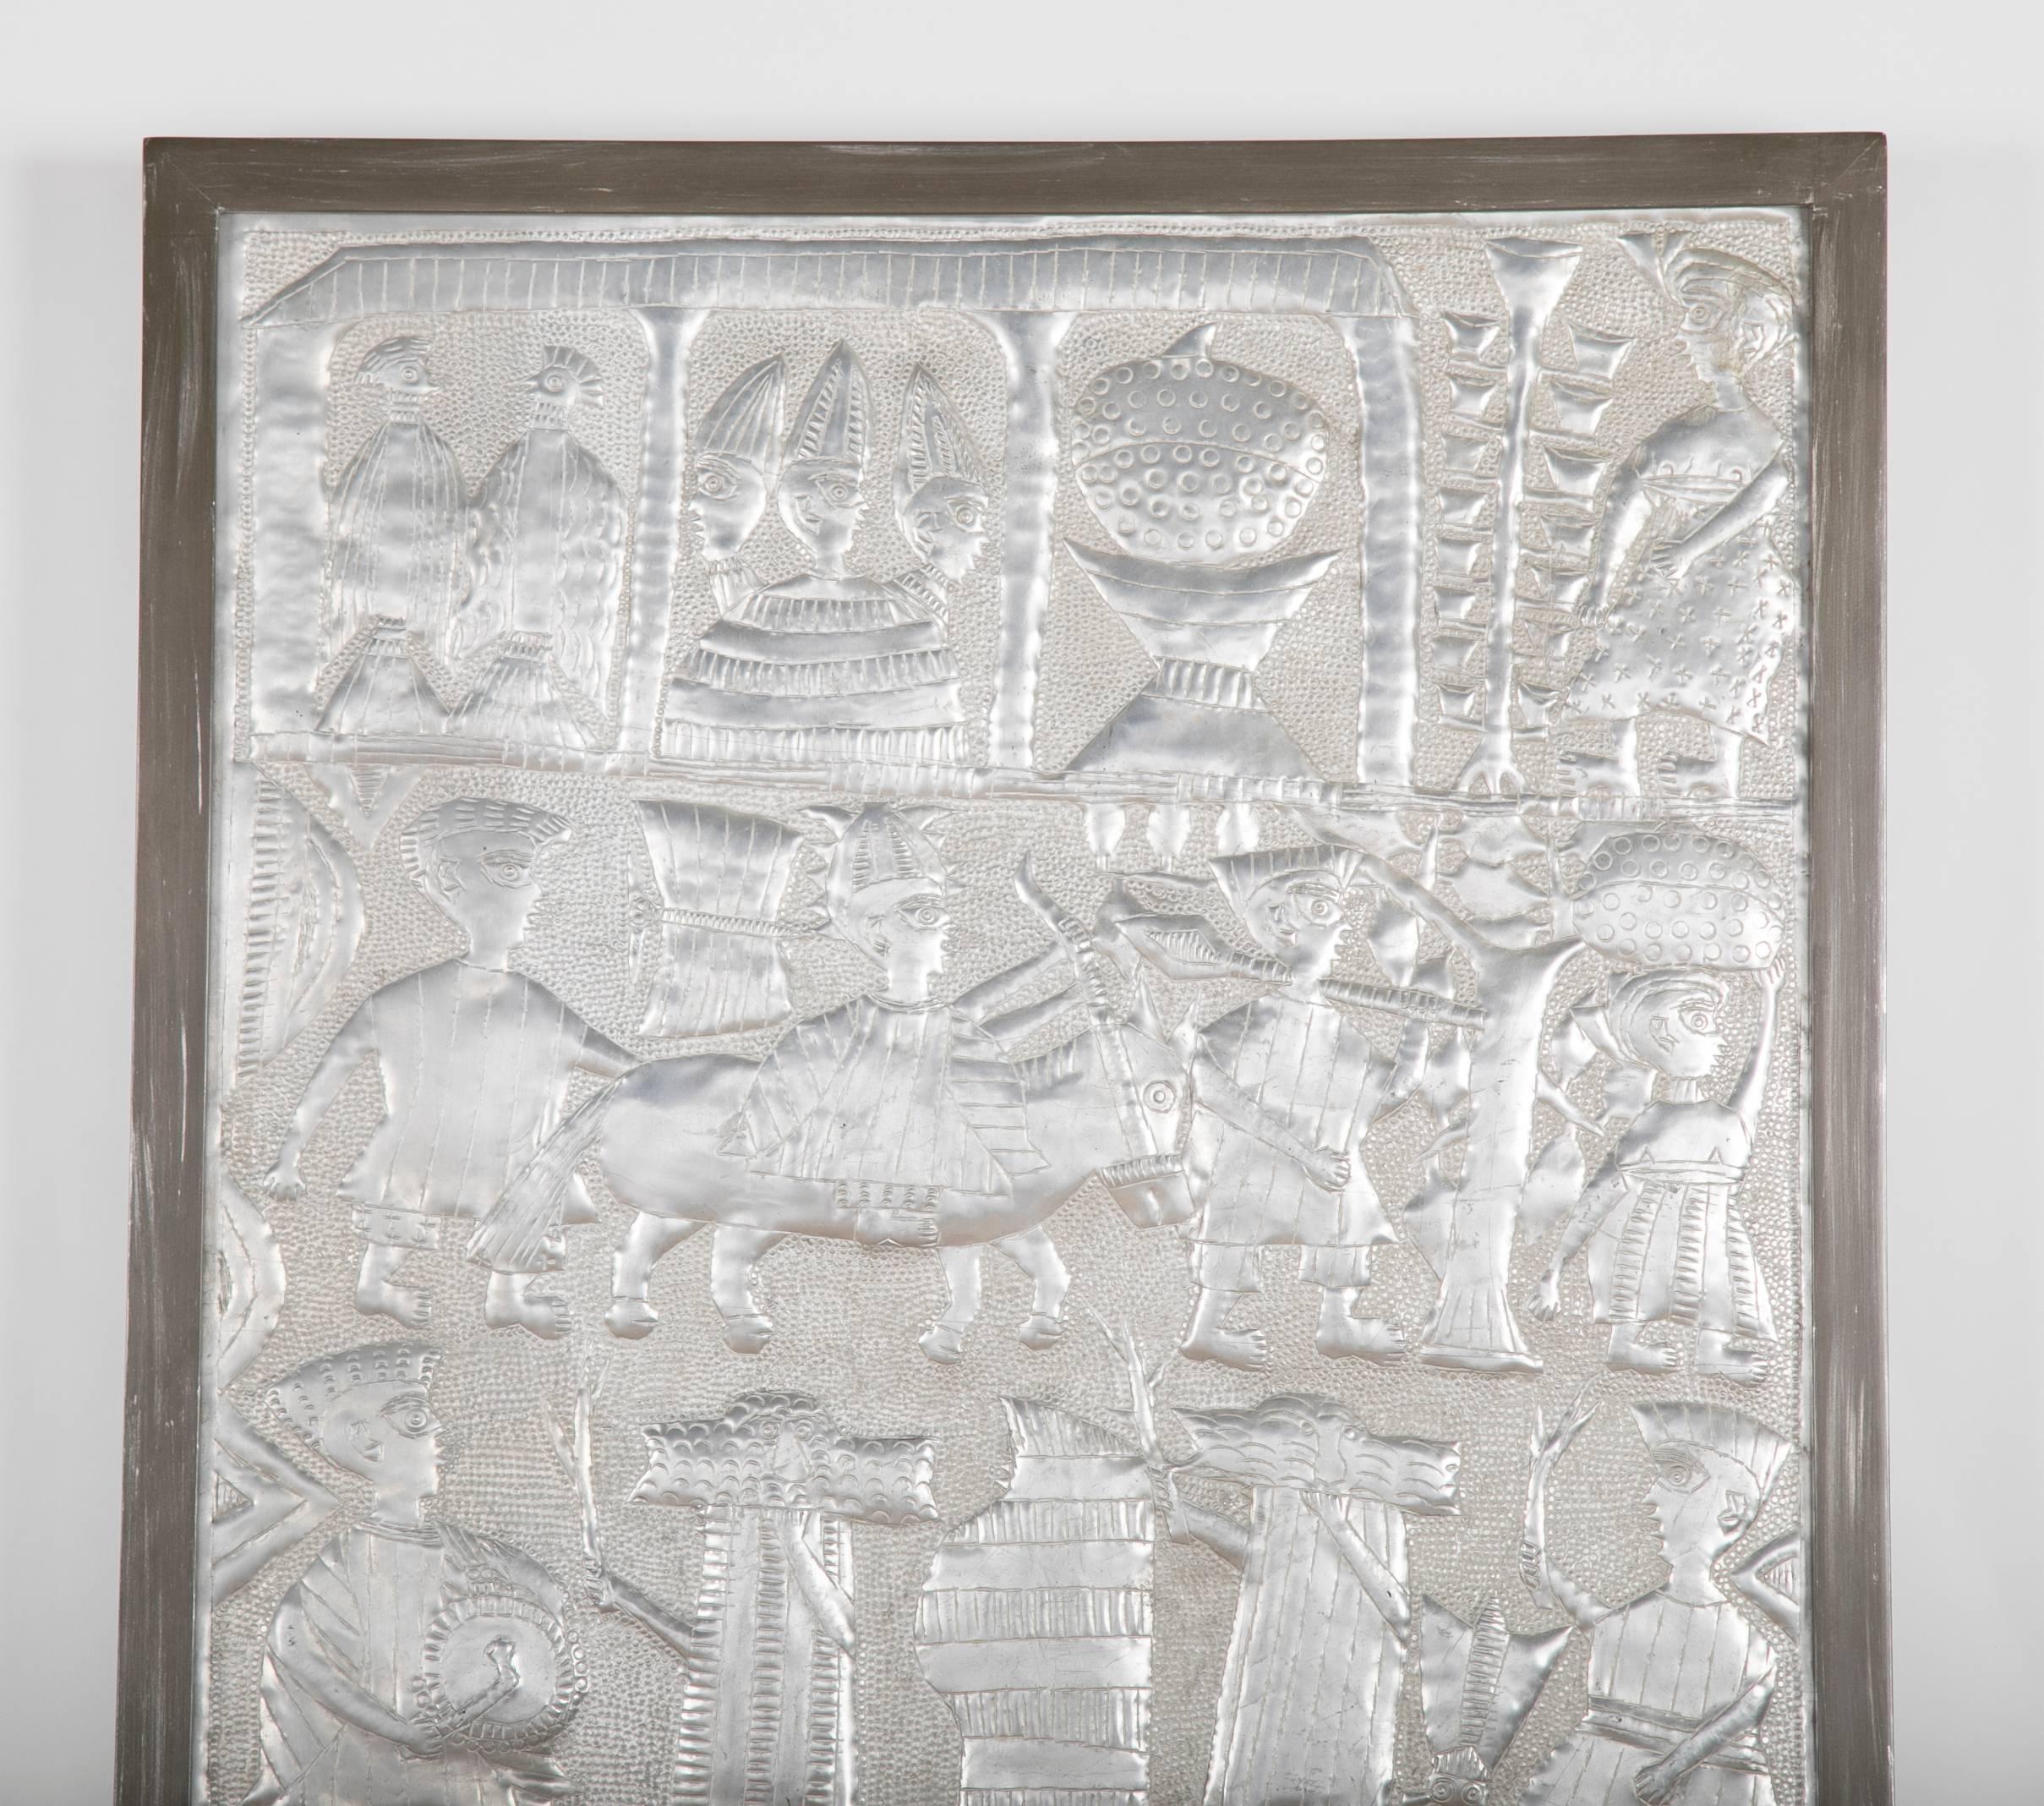 A hammered aluminum plaque of Yoruba tribal scenes by Nigerian artist Asiru Olatunde 
(1918-1993). One of two pieces available by Olatunde.